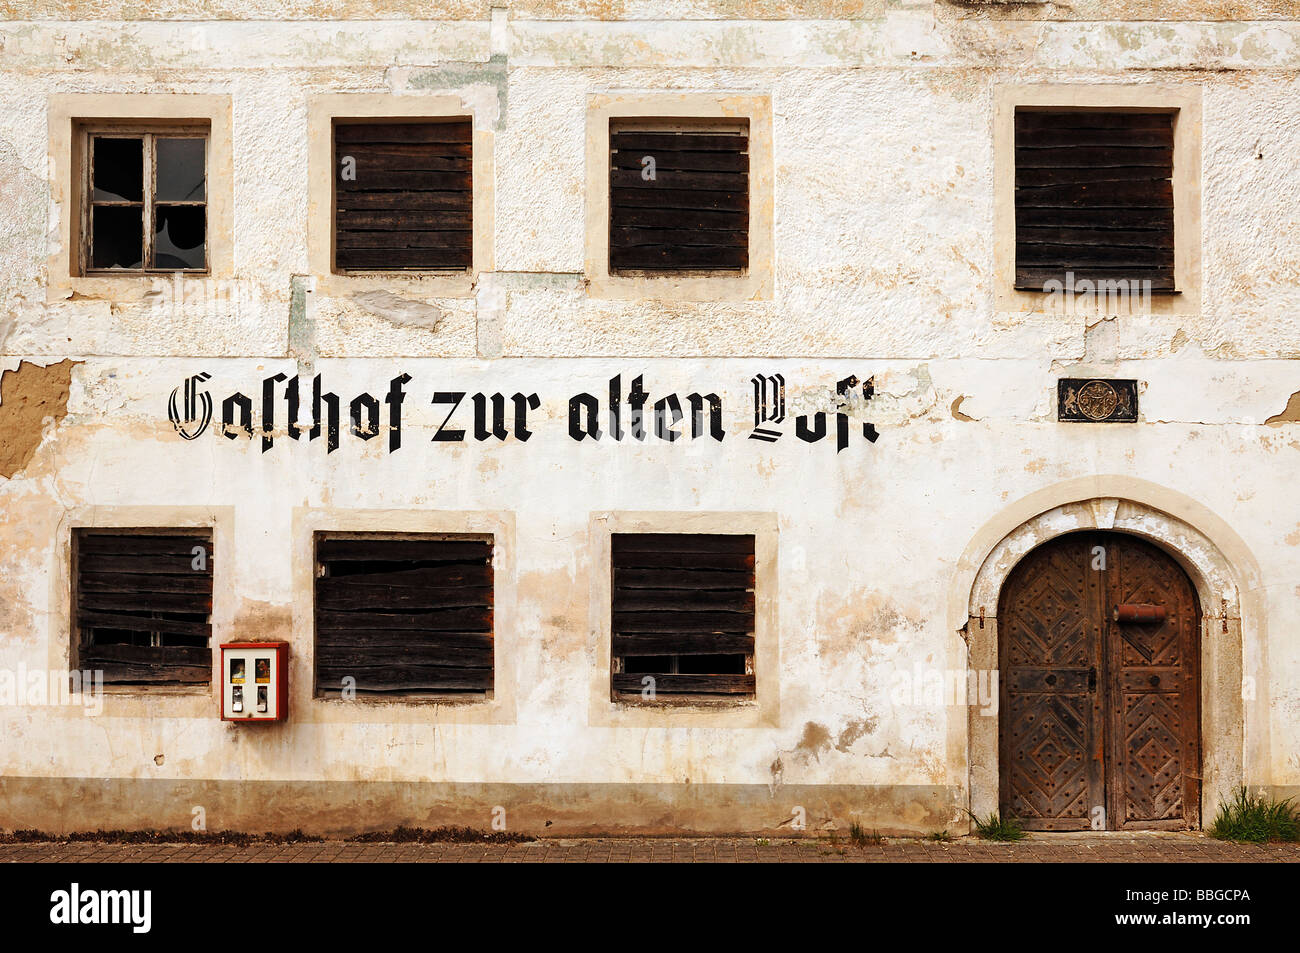 Facade of a dilapidated old inn 'Gasthof zur Post', detail, Kinding, Upper Bavaria, Germany, Europe Stock Photo